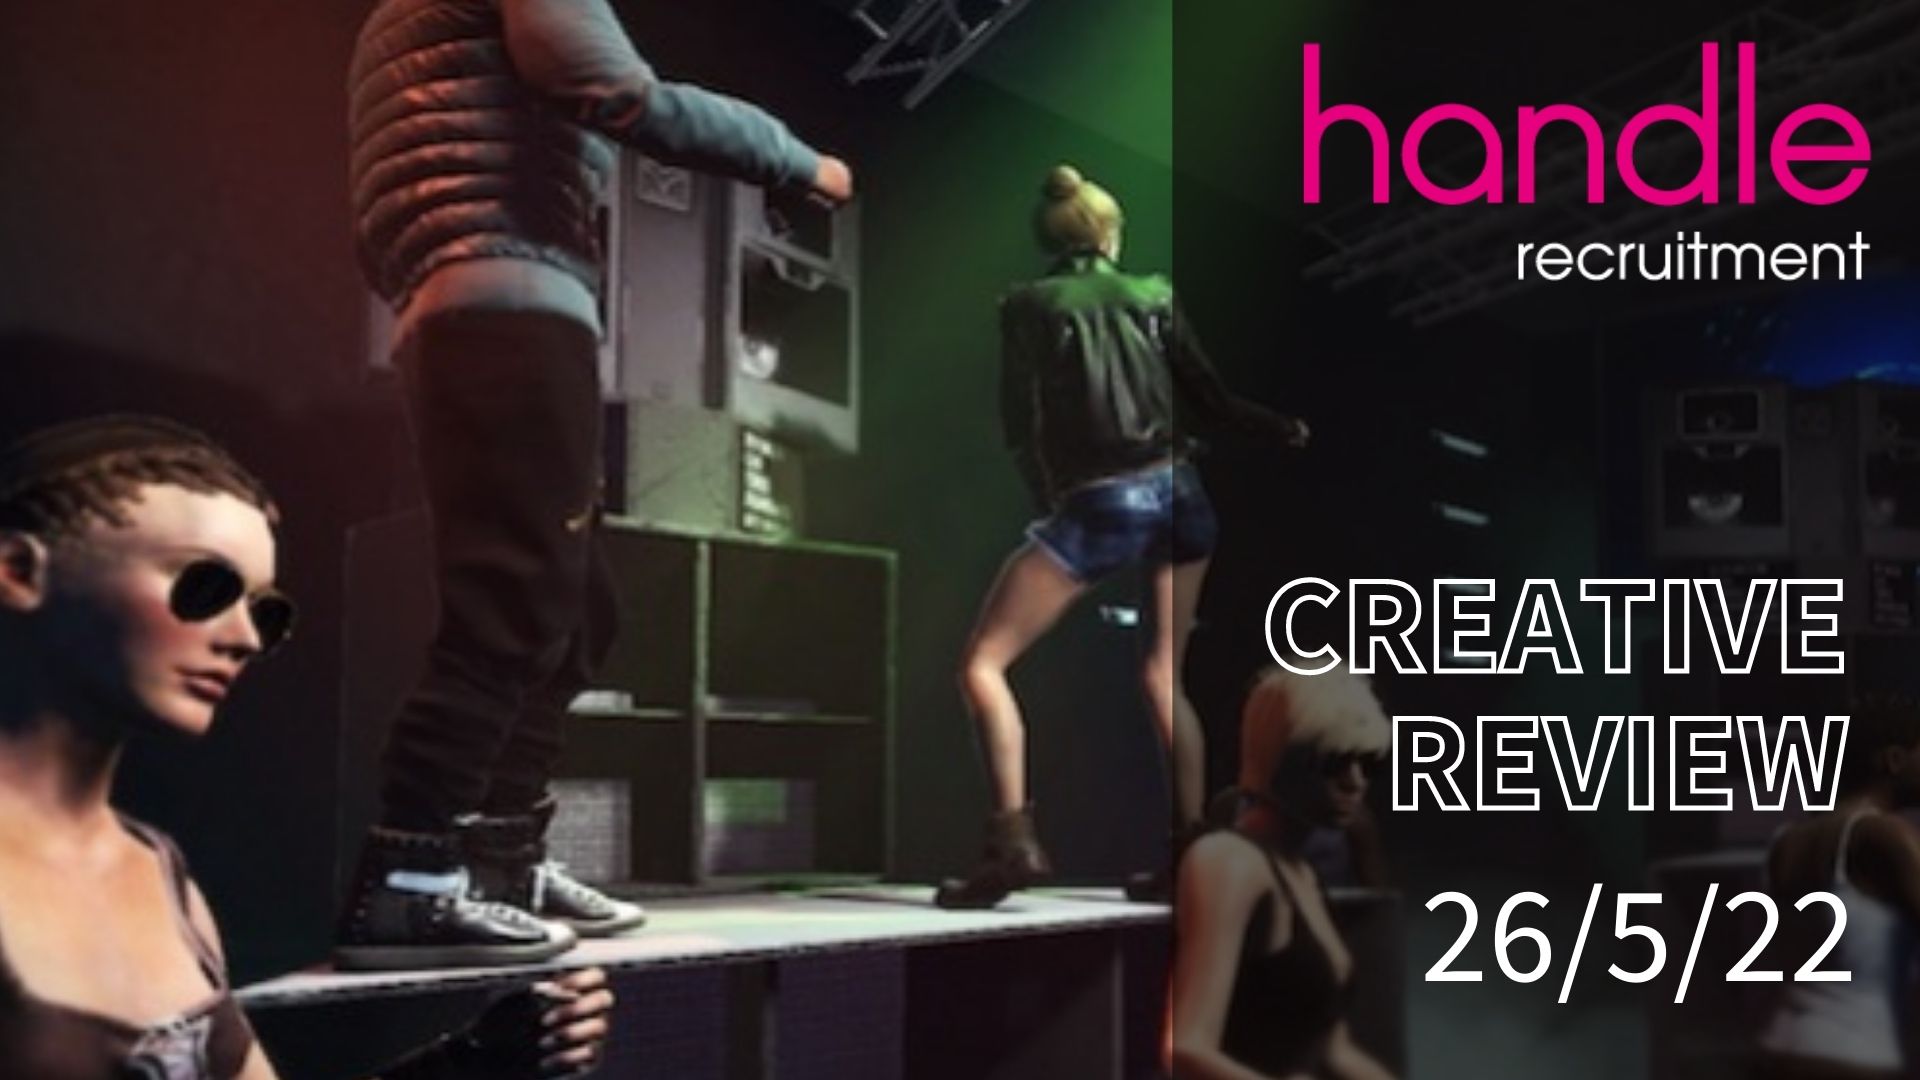 Creative Review 26th May 2022 - Handle Recruitment